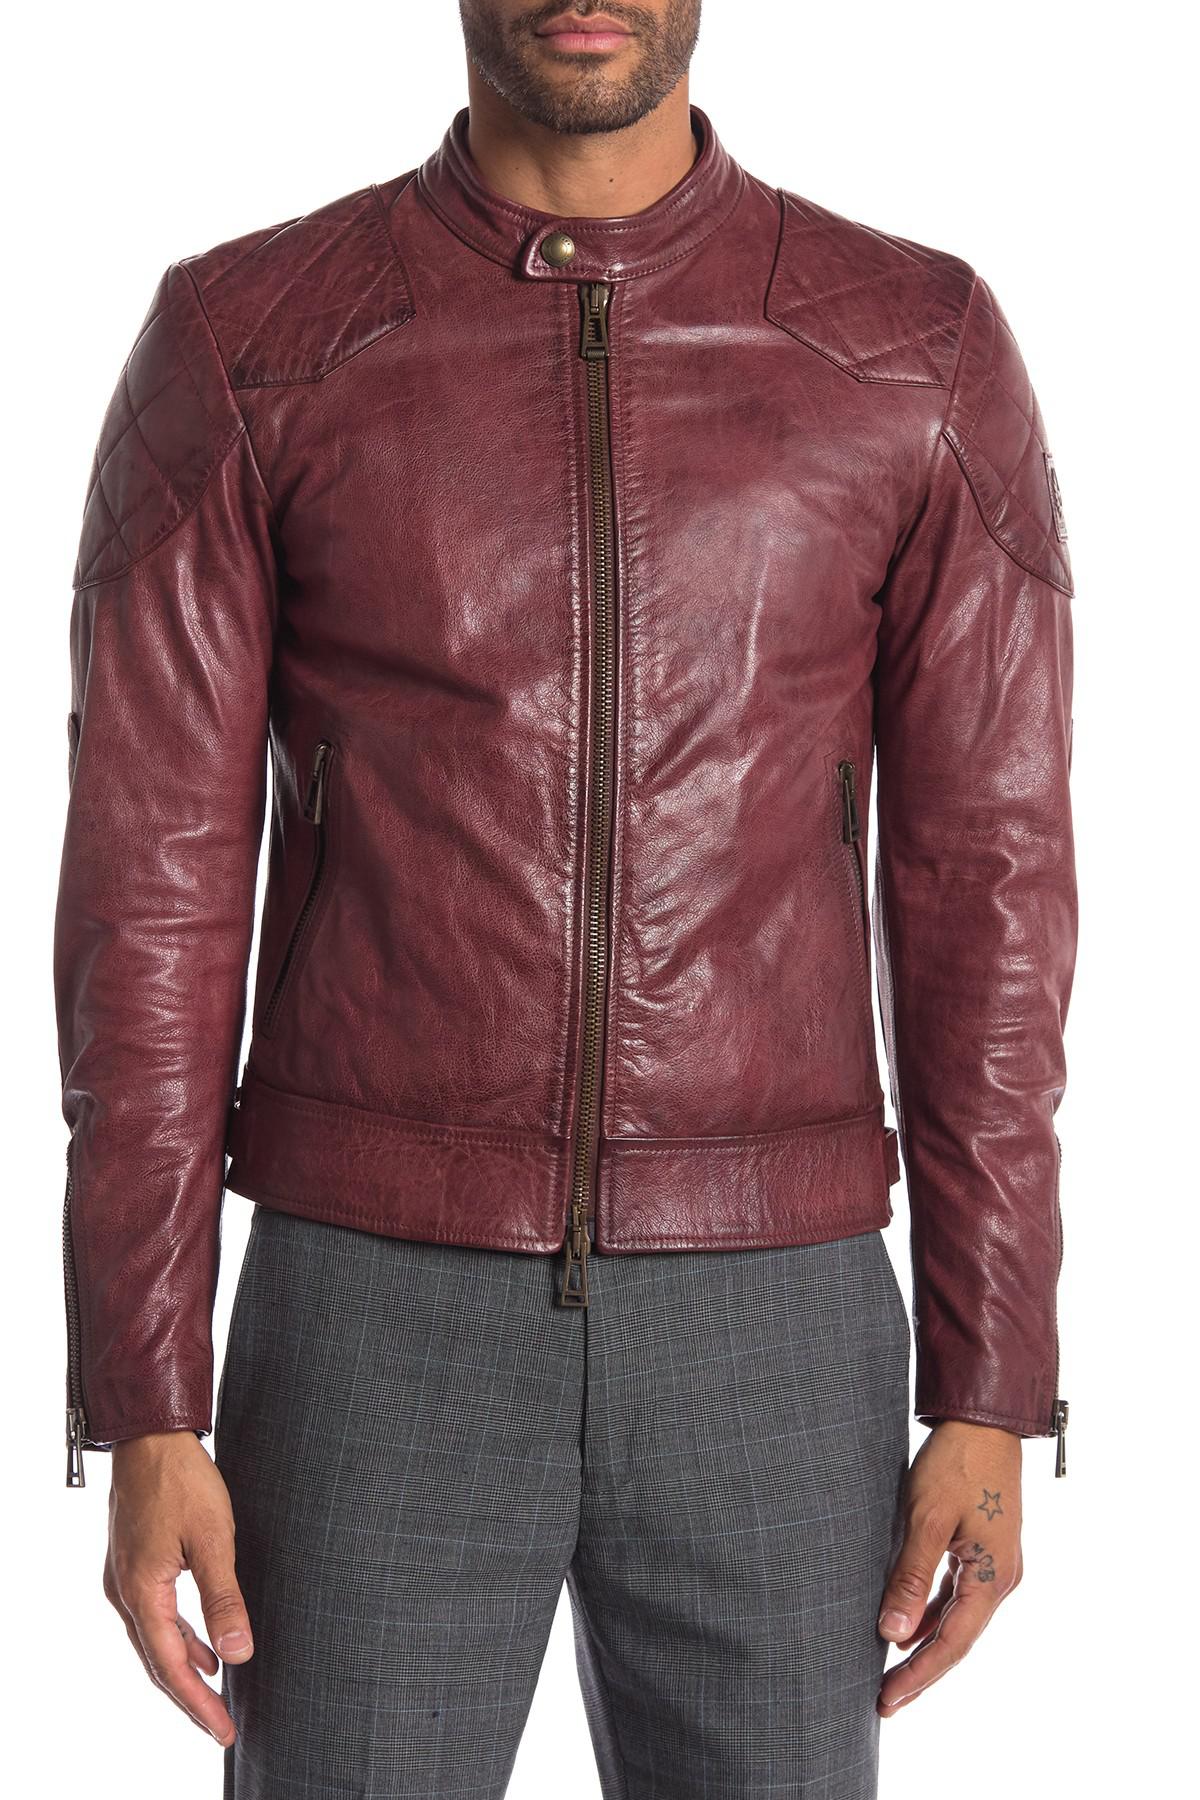 Belstaff Outlaw Oxblood Leather Jacket in Oxblood Red (Red) for Men - Lyst